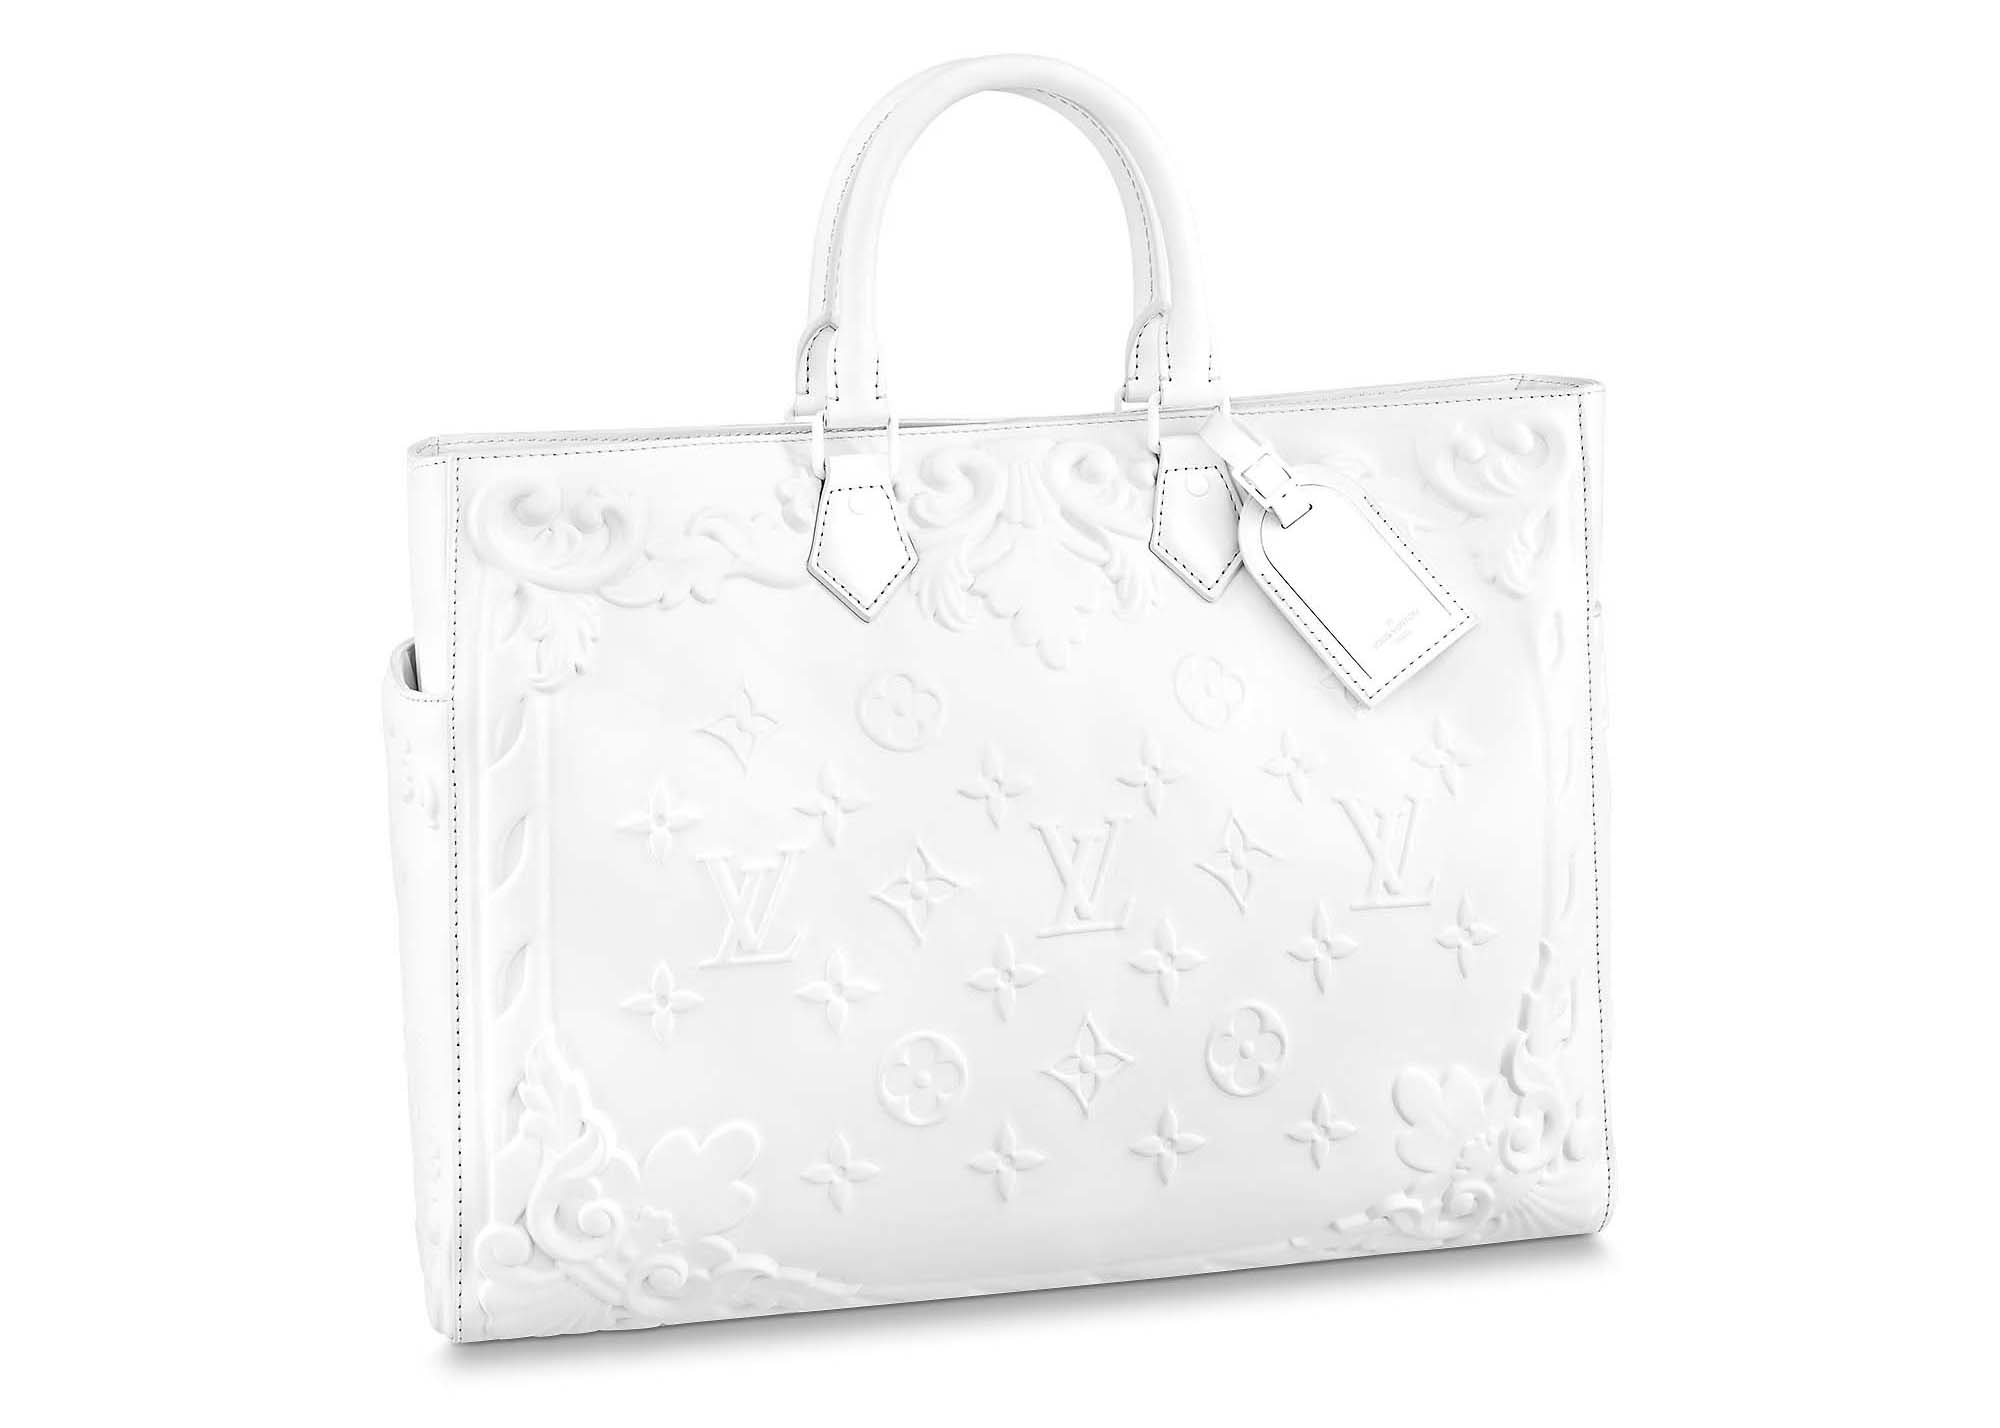 Louis Vuitton Sac Plat Optic White in Calfskin Leather with Tone